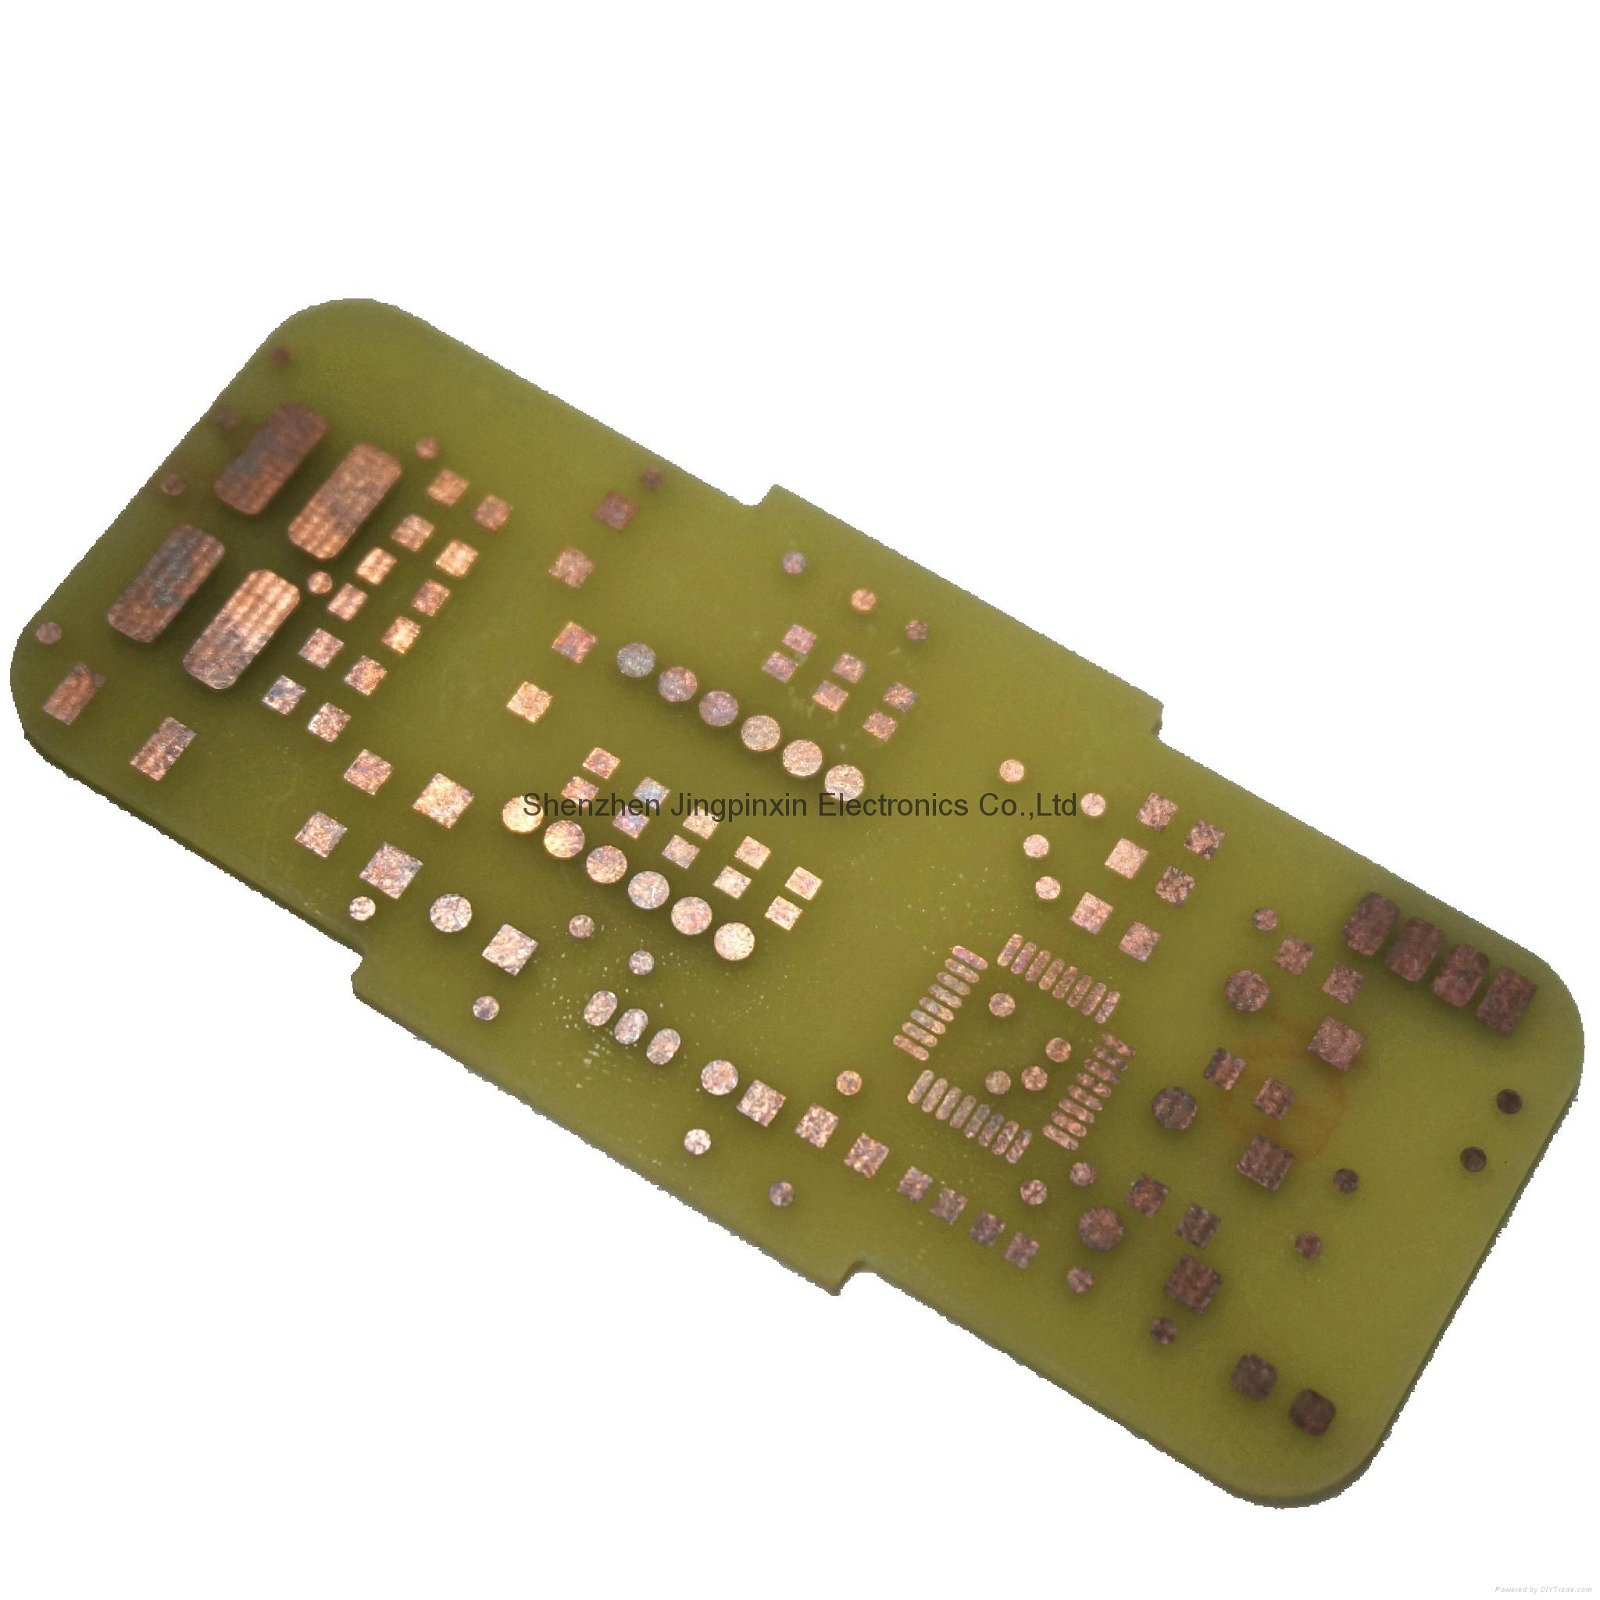 Single-sided Printed Circuit Board For Car Electronics